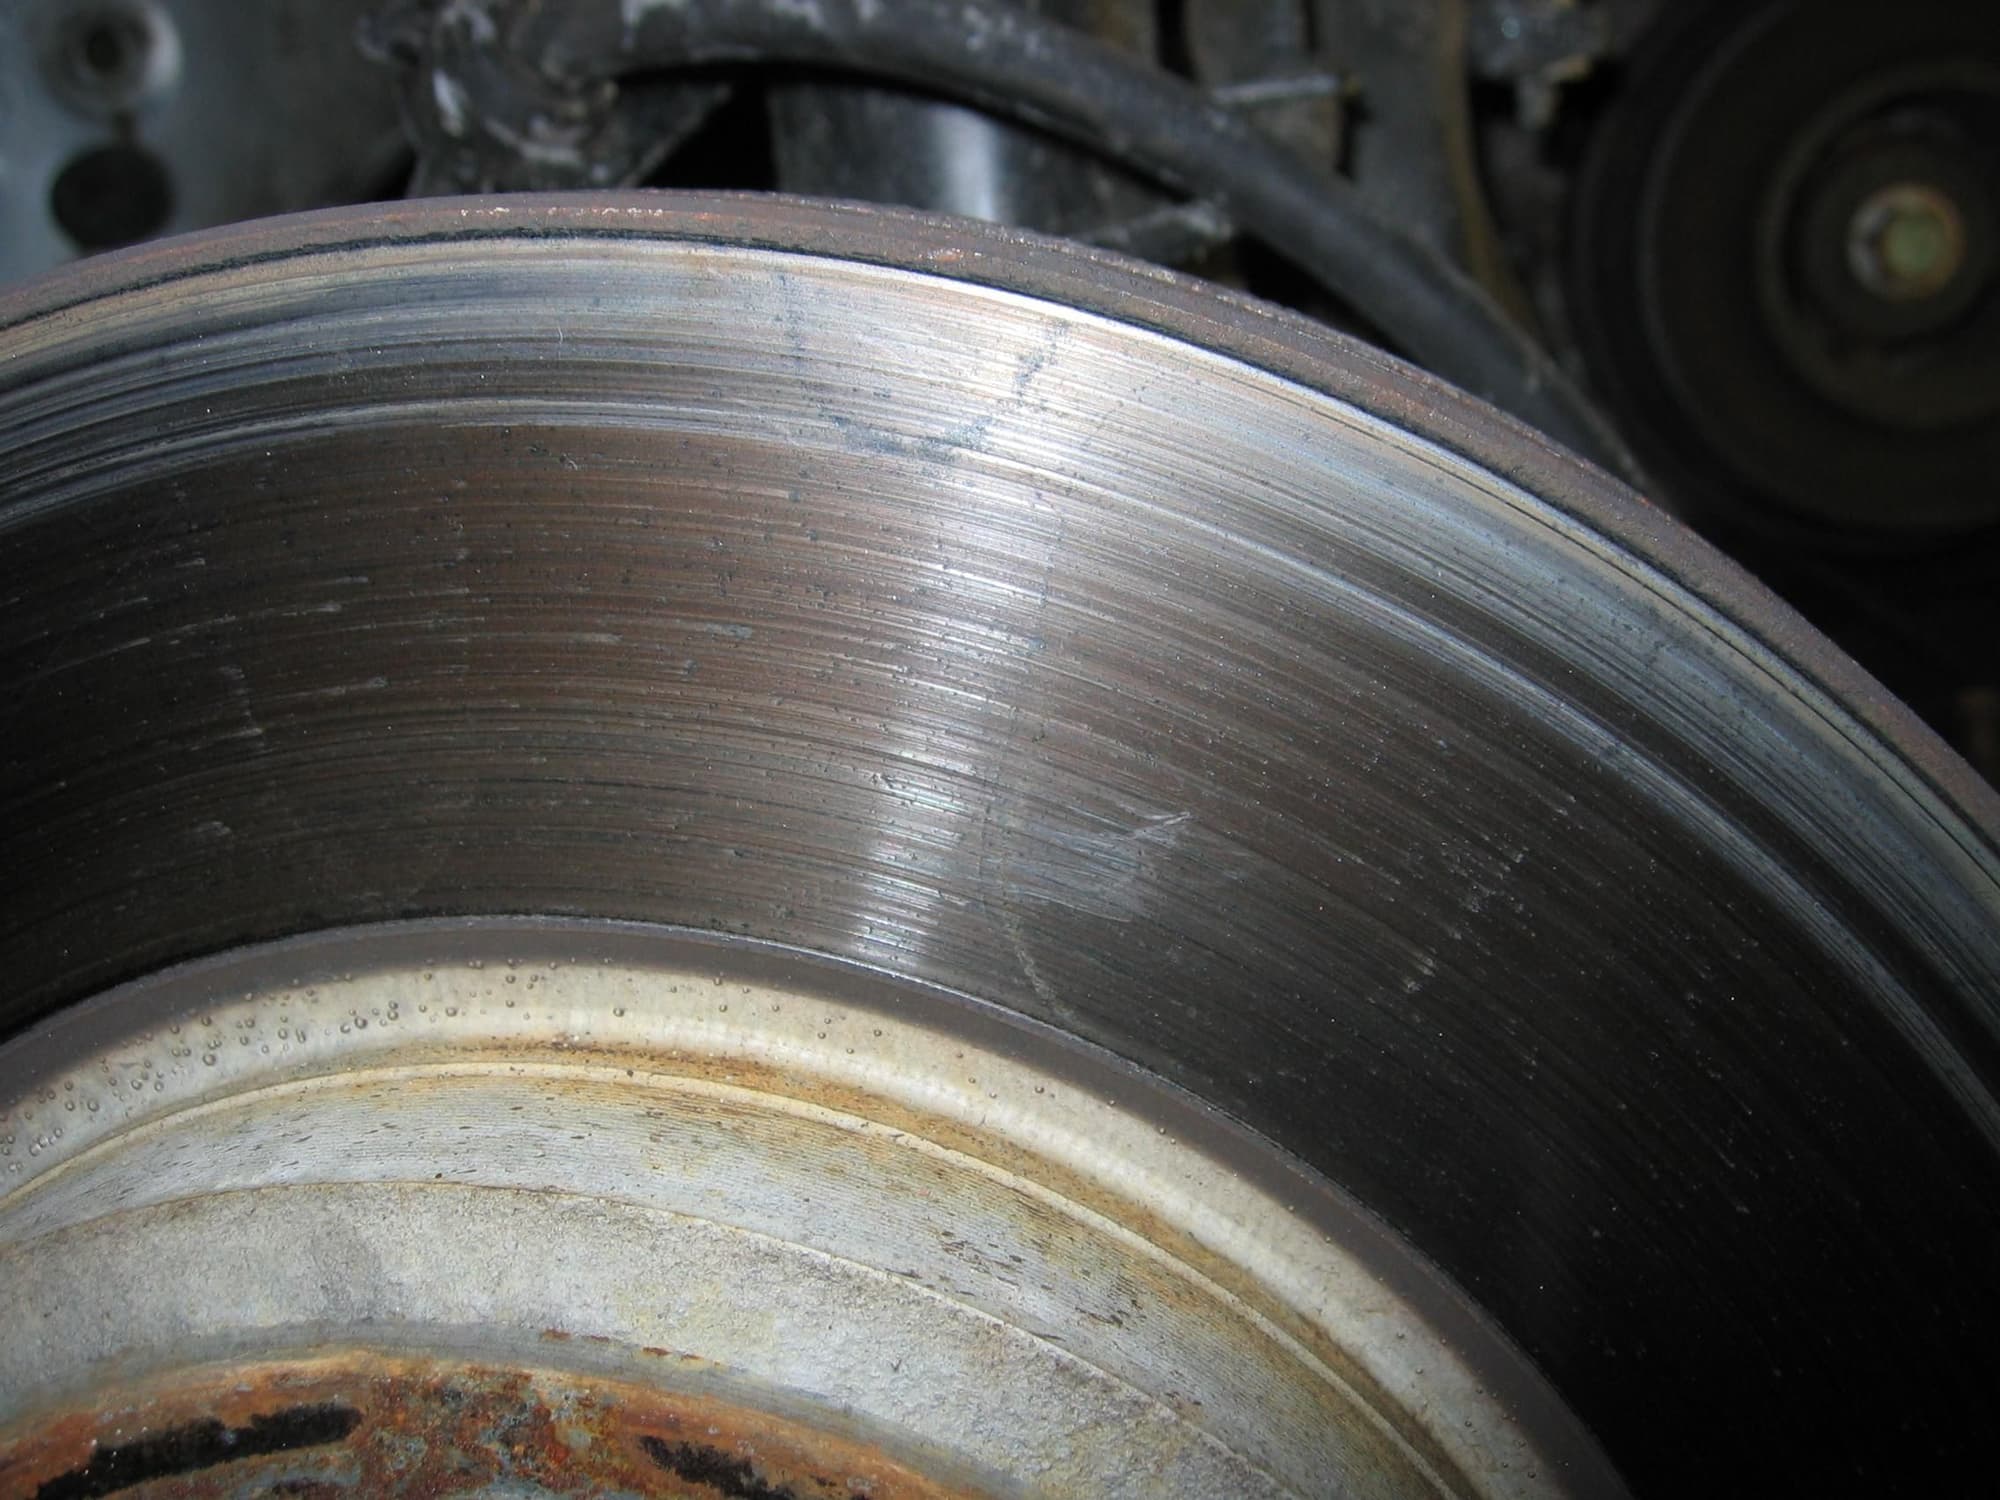 OEM -01 Brake pads after 45,000 miles - Unofficial Honda FIT Forums